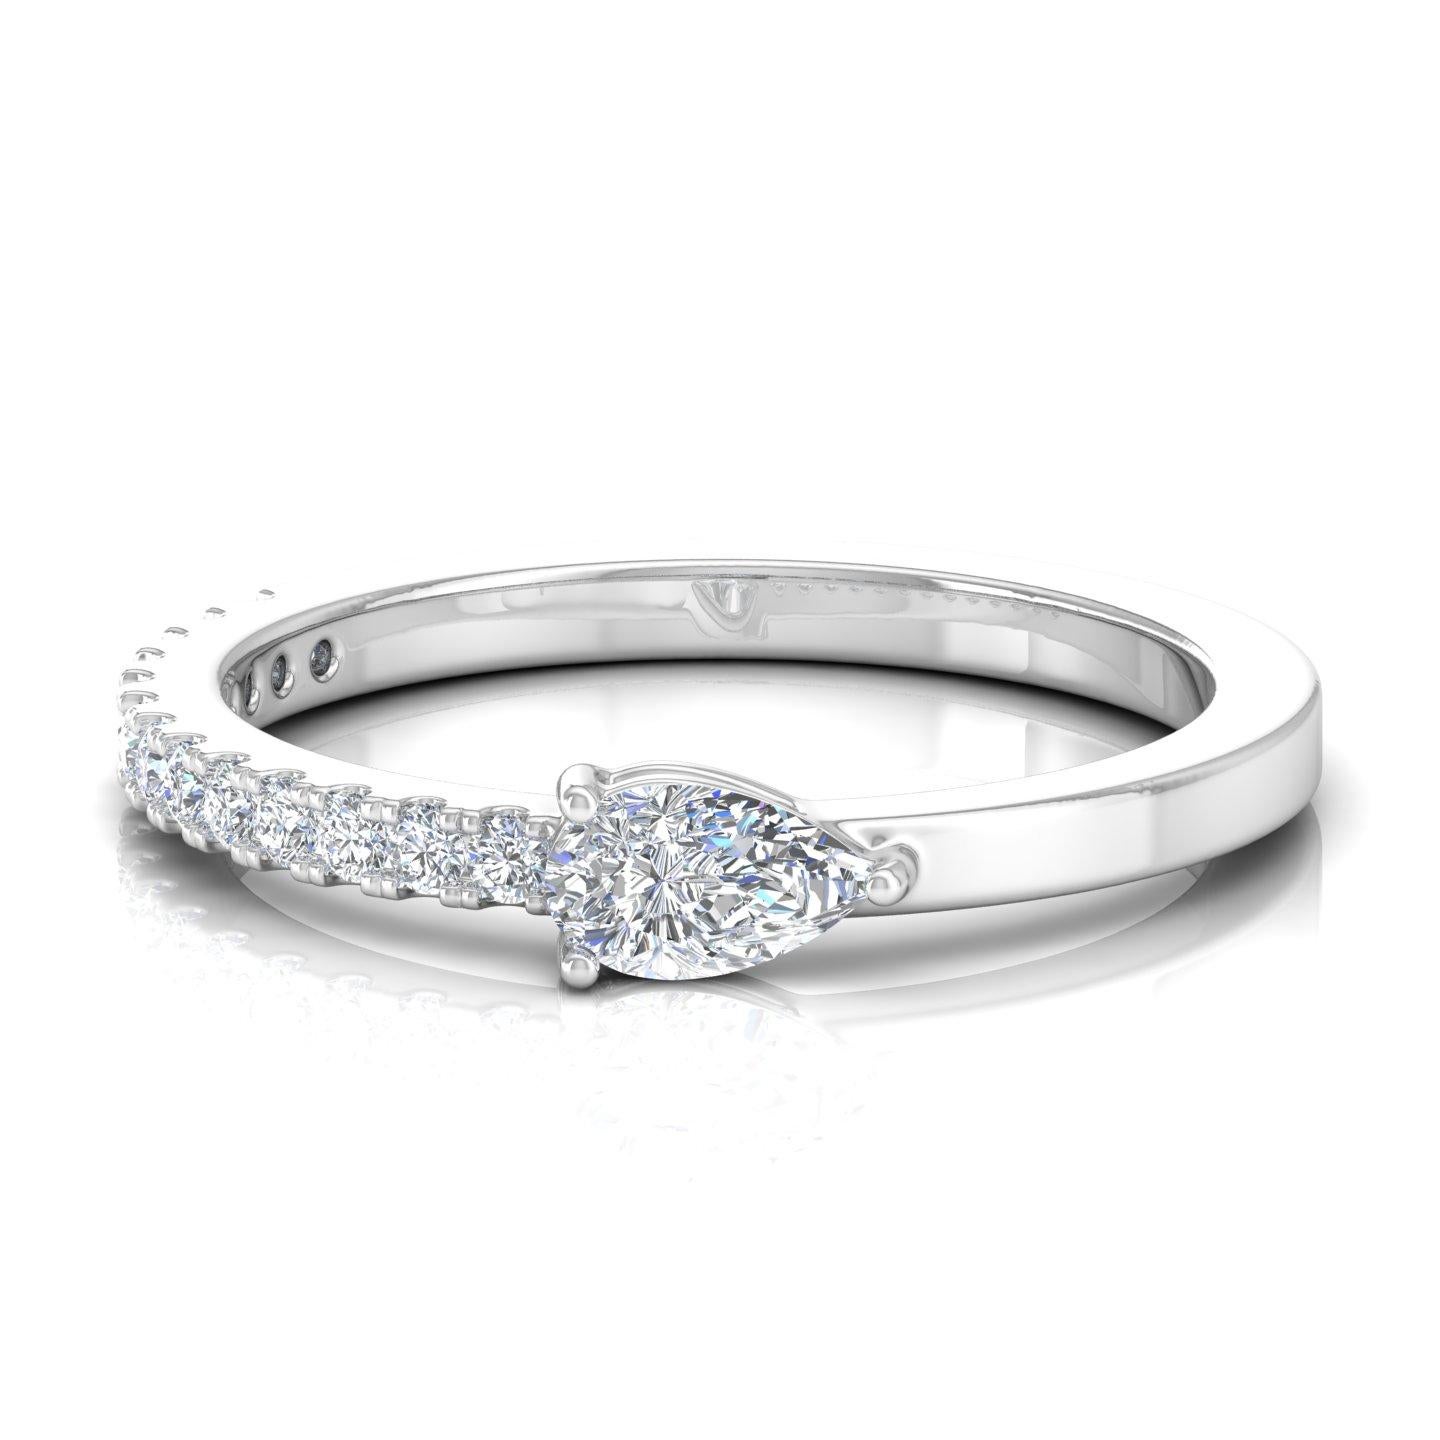 For Sale:  Natural 0.49 Carat SI Clarity HI Color Pear Diamond Band Ring 14k White Gold 6